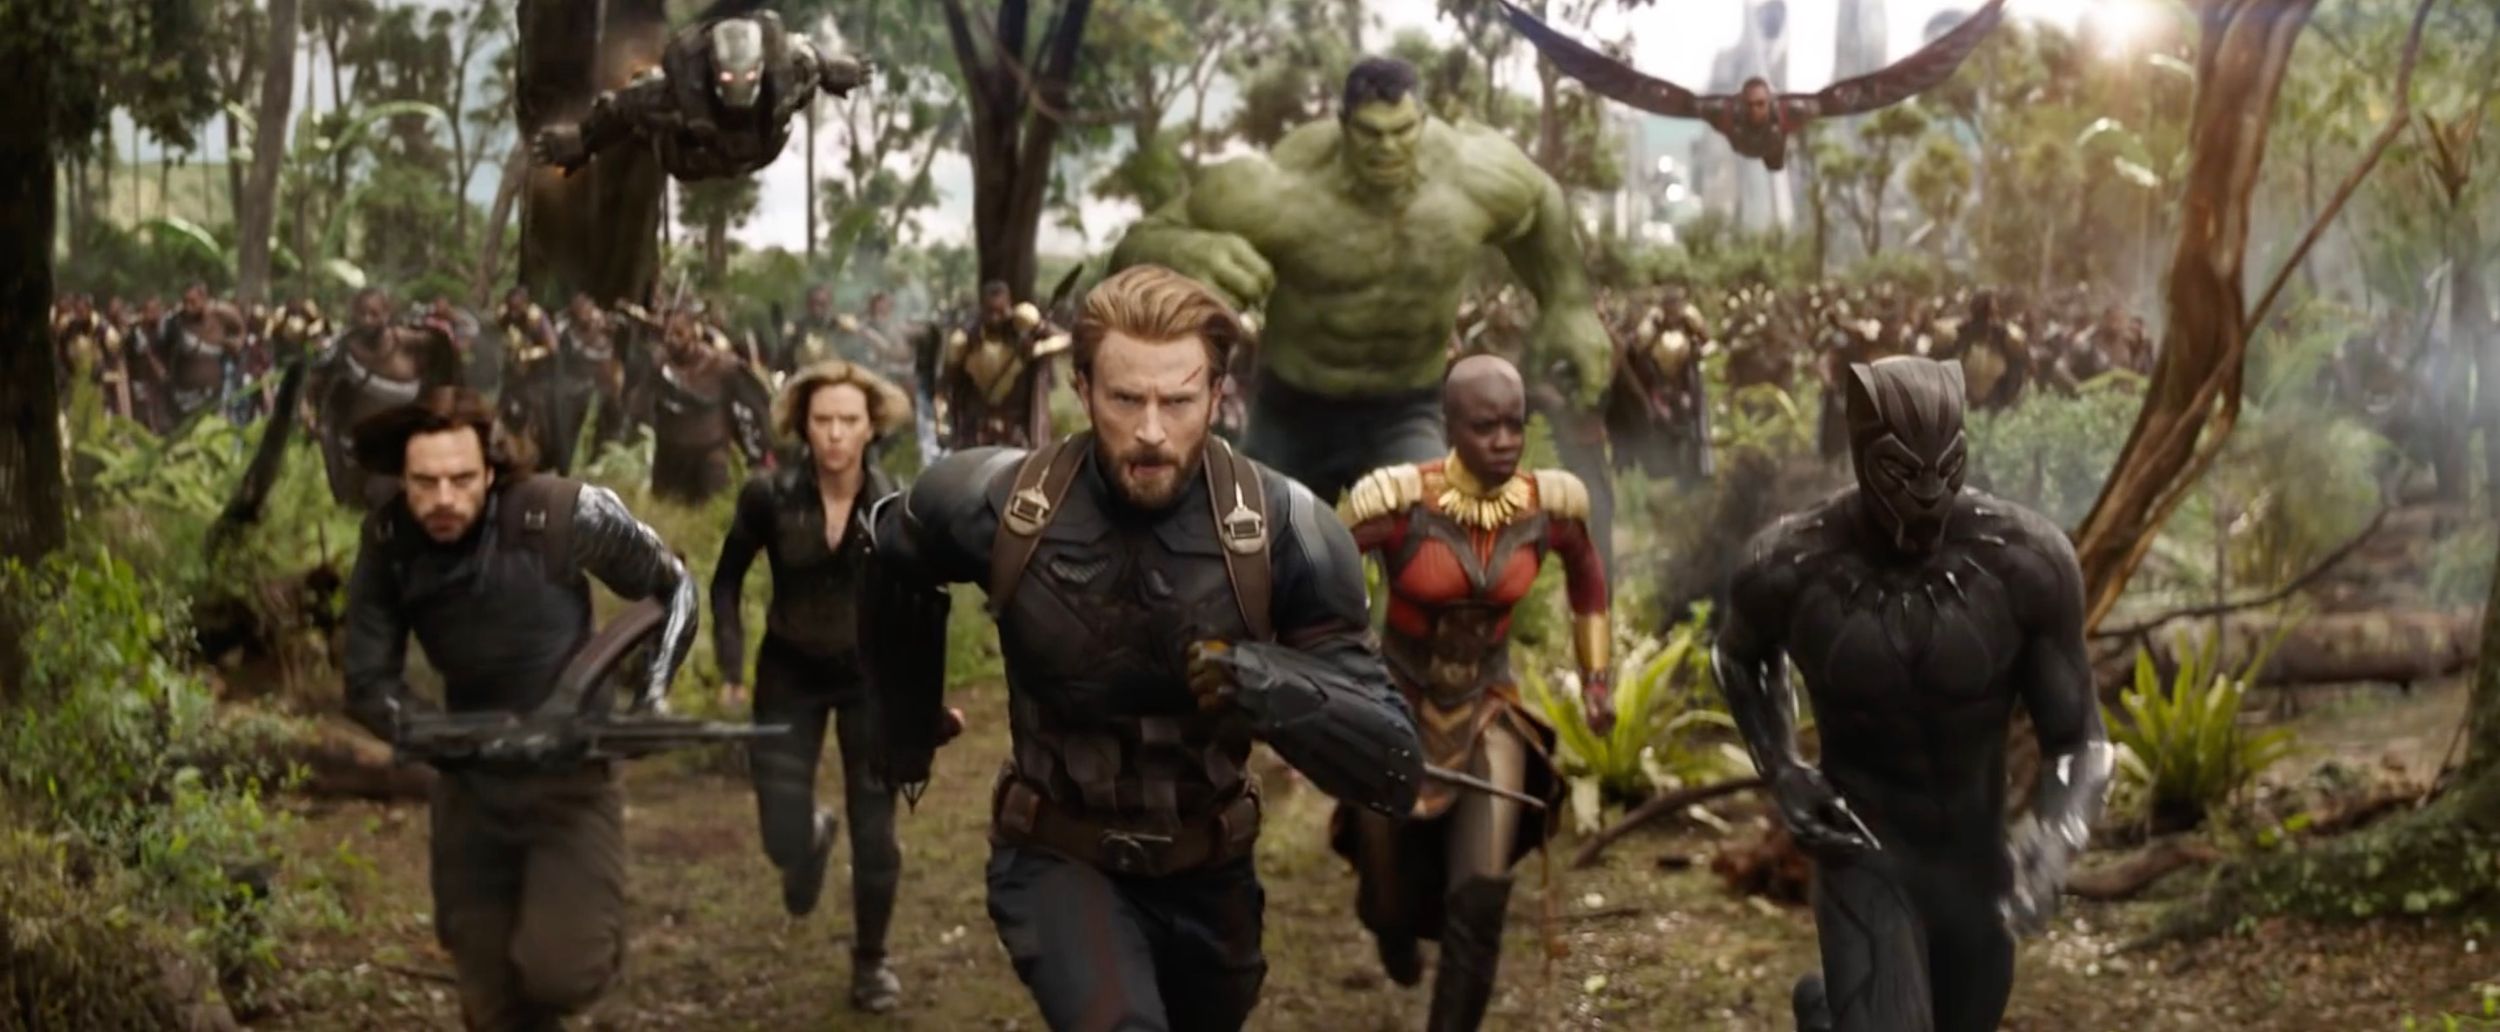 15 More Or Less Healthy Ways I've Dealt With "Infinity War"